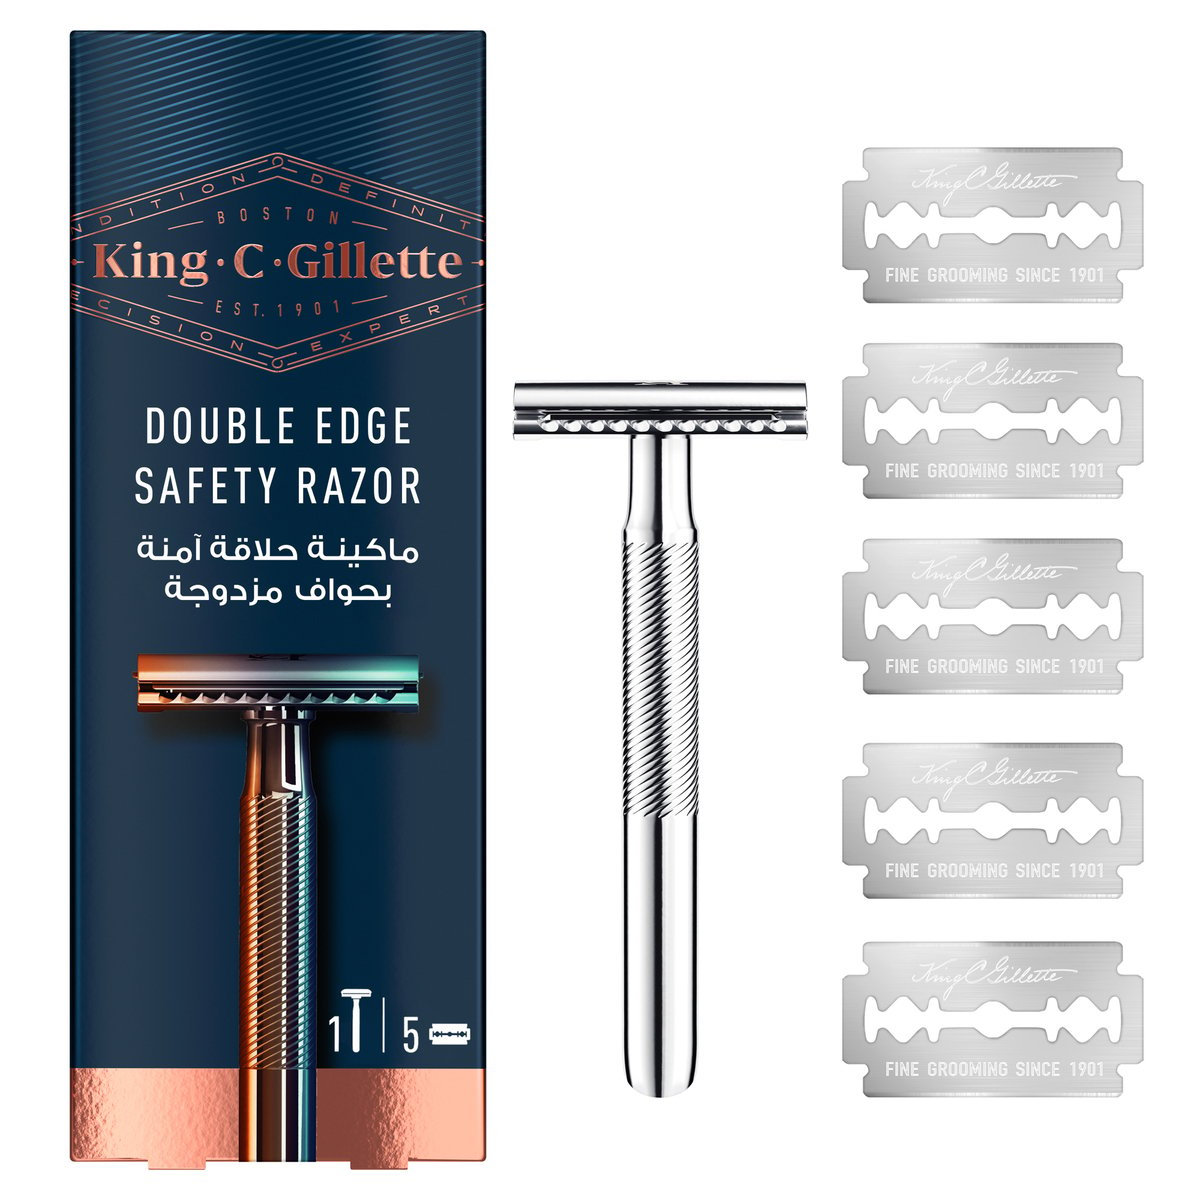 King C. Gillette Men's Double Edge Safety Razor with Gillette's Best Platinum Coated Double Edge Blades and Classic Inspired Chrome Plated Handle